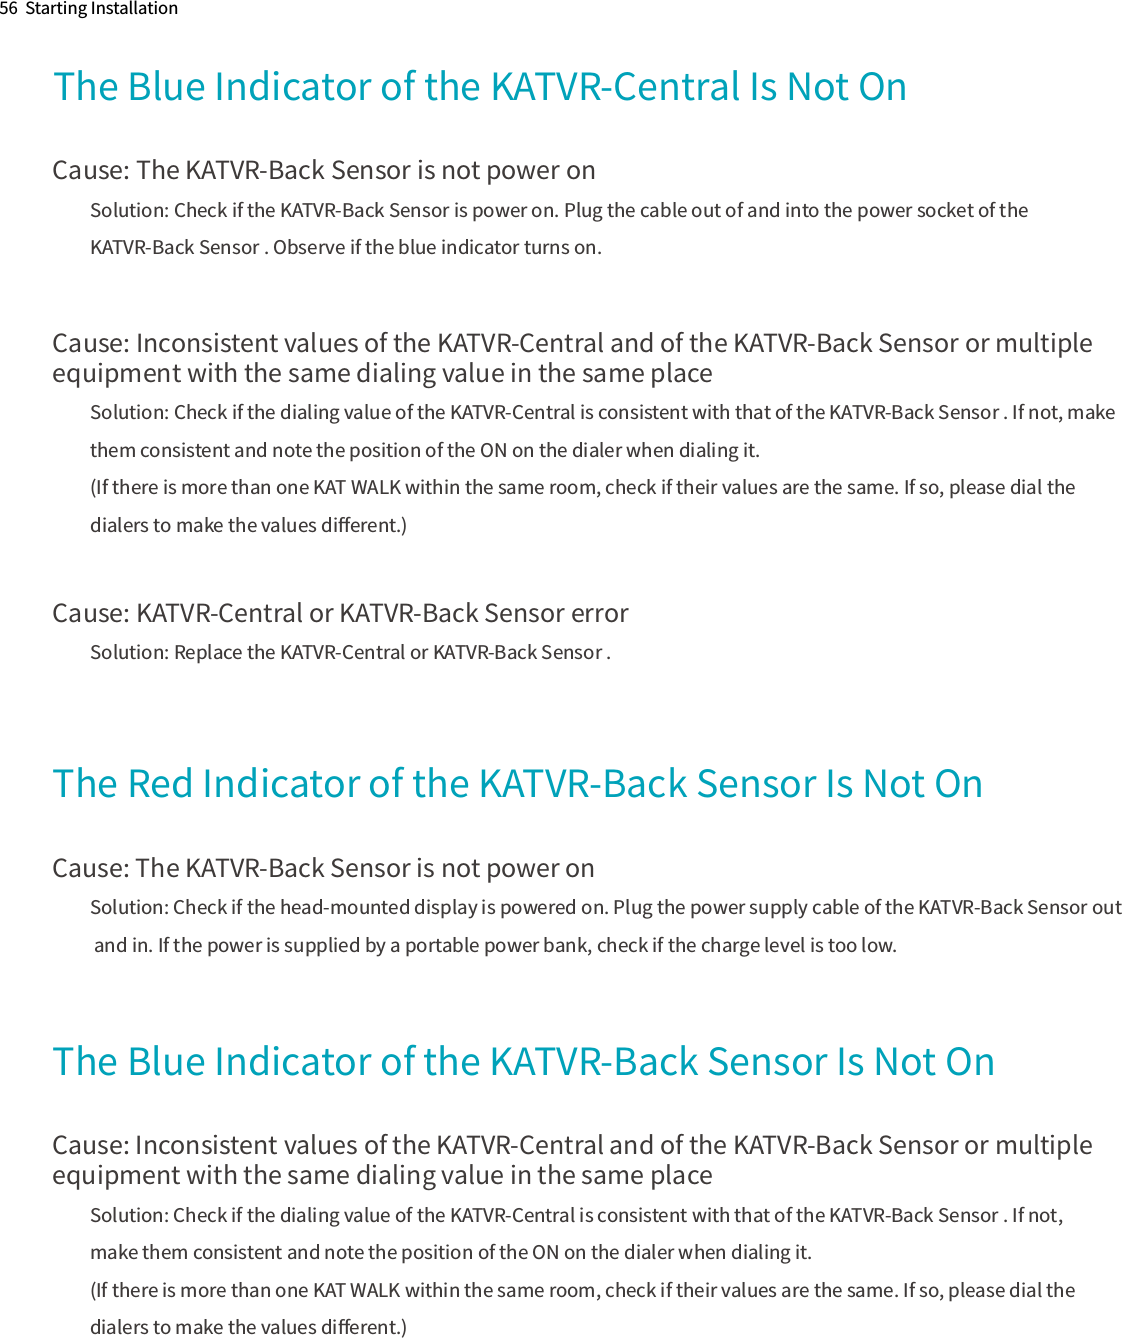 The Blue Indicator of the KATVR-Central Is Not OnCause: The KATVR-Back Sensor is not power onSolution: Check if the KATVR-Back Sensor is power on. Plug the cable out of and into the power socket of the KATVR-Back Sensor . Observe if the blue indicator turns on.Cause: Inconsistent values of the KATVR-Central and of the KATVR-Back Sensor or multiple equipment with the same dialing value in the same placeSolution: Check if the dialing value of the KATVR-Central is consistent with that of the KATVR-Back Sensor . If not, make them consistent and note the position of the ON on the dialer when dialing it.(If there is more than one KAT WALK within the same room, check if their values are the same. If so, please dial the dialers to make the values diﬀerent.)Cause: KATVR-Central or KATVR-Back Sensor errorSolution: Replace the KATVR-Central or KATVR-Back Sensor .The Red Indicator of the KATVR-Back Sensor Is Not OnCause: The KATVR-Back Sensor is not power onSolution: Check if the head-mounted display is powered on. Plug the power supply cable of the KATVR-Back Sensor out and in. If the power is supplied by a portable power bank, check if the charge level is too low.Cause: Inconsistent values of the KATVR-Central and of the KATVR-Back Sensor or multiple equipment with the same dialing value in the same placeSolution: Check if the dialing value of the KATVR-Central is consistent with that of the KATVR-Back Sensor . If not, make them consistent and note the position of the ON on the dialer when dialing it.(If there is more than one KAT WALK within the same room, check if their values are the same. If so, please dial the dialers to make the values diﬀerent.)56  Starting InstallationThe Blue Indicator of the KATVR-Back Sensor Is Not On